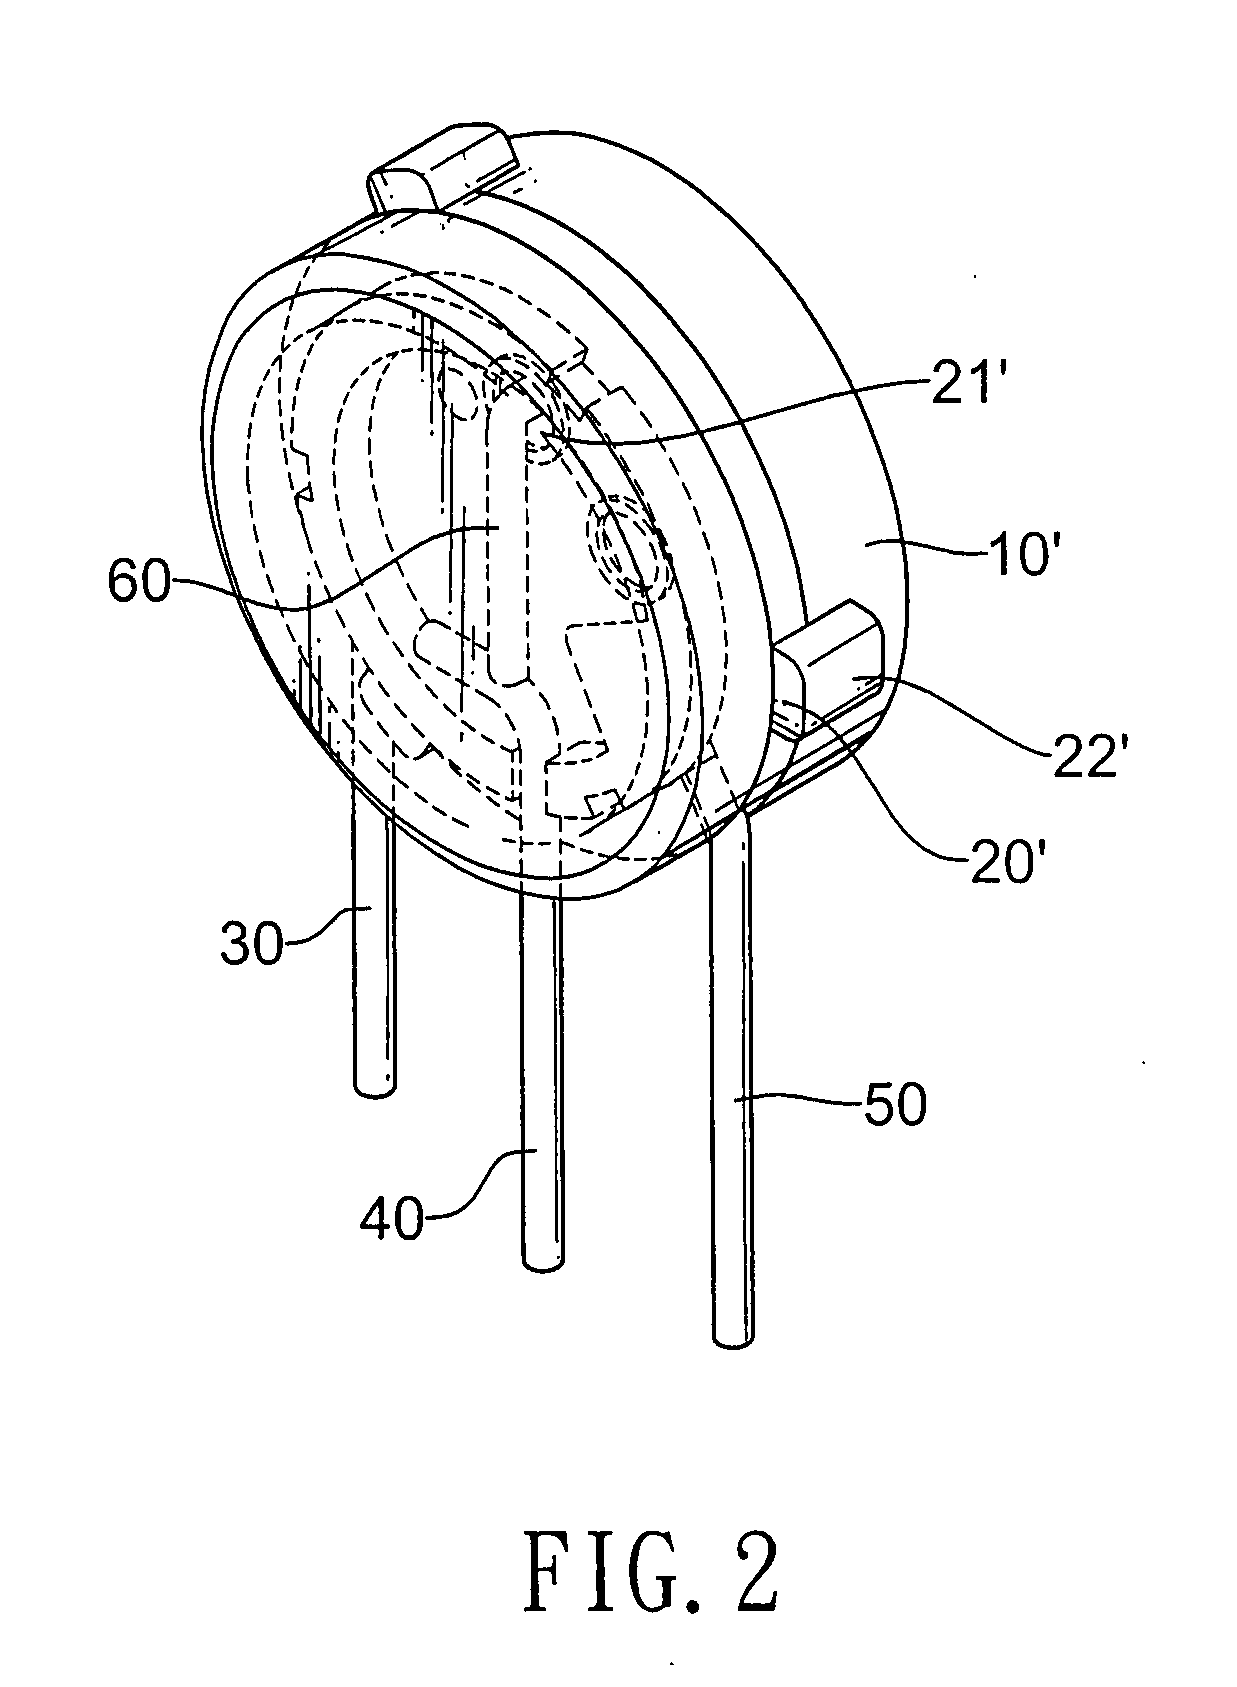 Metal oxide varistor with heat protection